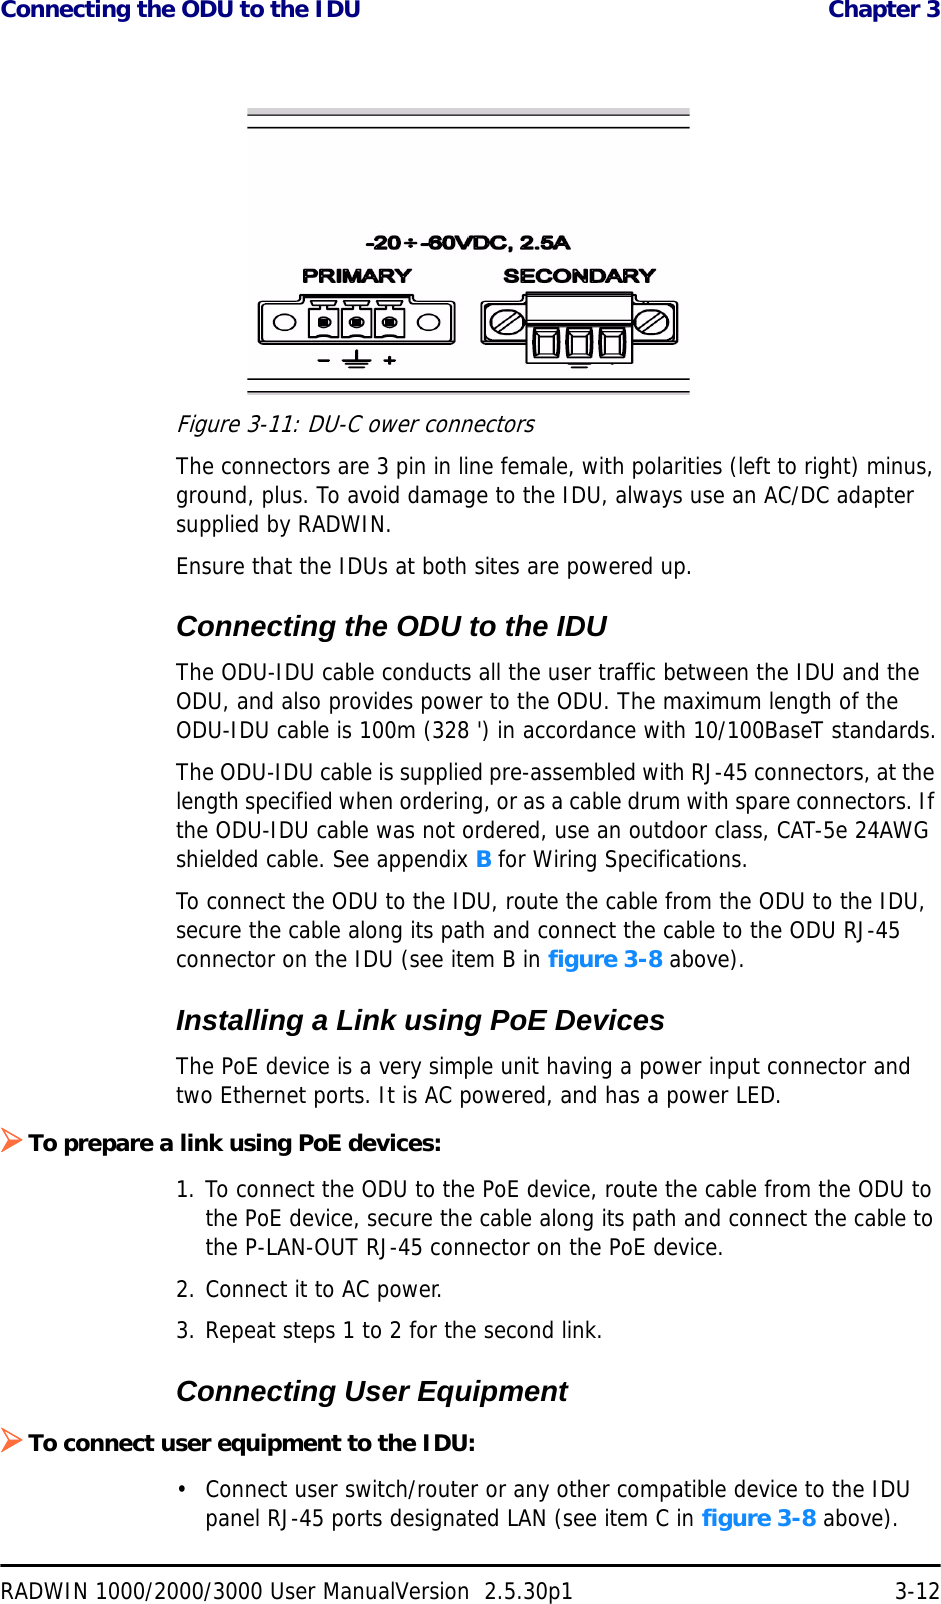 Connecting the ODU to the IDU  Chapter 3RADWIN 1000/2000/3000 User ManualVersion  2.5.30p1 3-12Figure 3-11: DU-C ower connectorsThe connectors are 3 pin in line female, with polarities (left to right) minus, ground, plus. To avoid damage to the IDU, always use an AC/DC adapter supplied by RADWIN.Ensure that the IDUs at both sites are powered up.Connecting the ODU to the IDUThe ODU-IDU cable conducts all the user traffic between the IDU and the ODU, and also provides power to the ODU. The maximum length of the ODU-IDU cable is 100m (328 &apos;) in accordance with 10/100BaseT standards.The ODU-IDU cable is supplied pre-assembled with RJ-45 connectors, at the length specified when ordering, or as a cable drum with spare connectors. If the ODU-IDU cable was not ordered, use an outdoor class, CAT-5e 24AWG shielded cable. See appendix B for Wiring Specifications.To connect the ODU to the IDU, route the cable from the ODU to the IDU, secure the cable along its path and connect the cable to the ODU RJ-45 connector on the IDU (see item B in figure 3-8 above).Installing a Link using PoE DevicesThe PoE device is a very simple unit having a power input connector and two Ethernet ports. It is AC powered, and has a power LED.¾To prepare a link using PoE devices:1. To connect the ODU to the PoE device, route the cable from the ODU to the PoE device, secure the cable along its path and connect the cable to the P-LAN-OUT RJ-45 connector on the PoE device.2. Connect it to AC power.3. Repeat steps 1 to 2 for the second link.Connecting User Equipment¾To connect user equipment to the IDU:• Connect user switch/router or any other compatible device to the IDU panel RJ-45 ports designated LAN (see item C in figure 3-8 above).